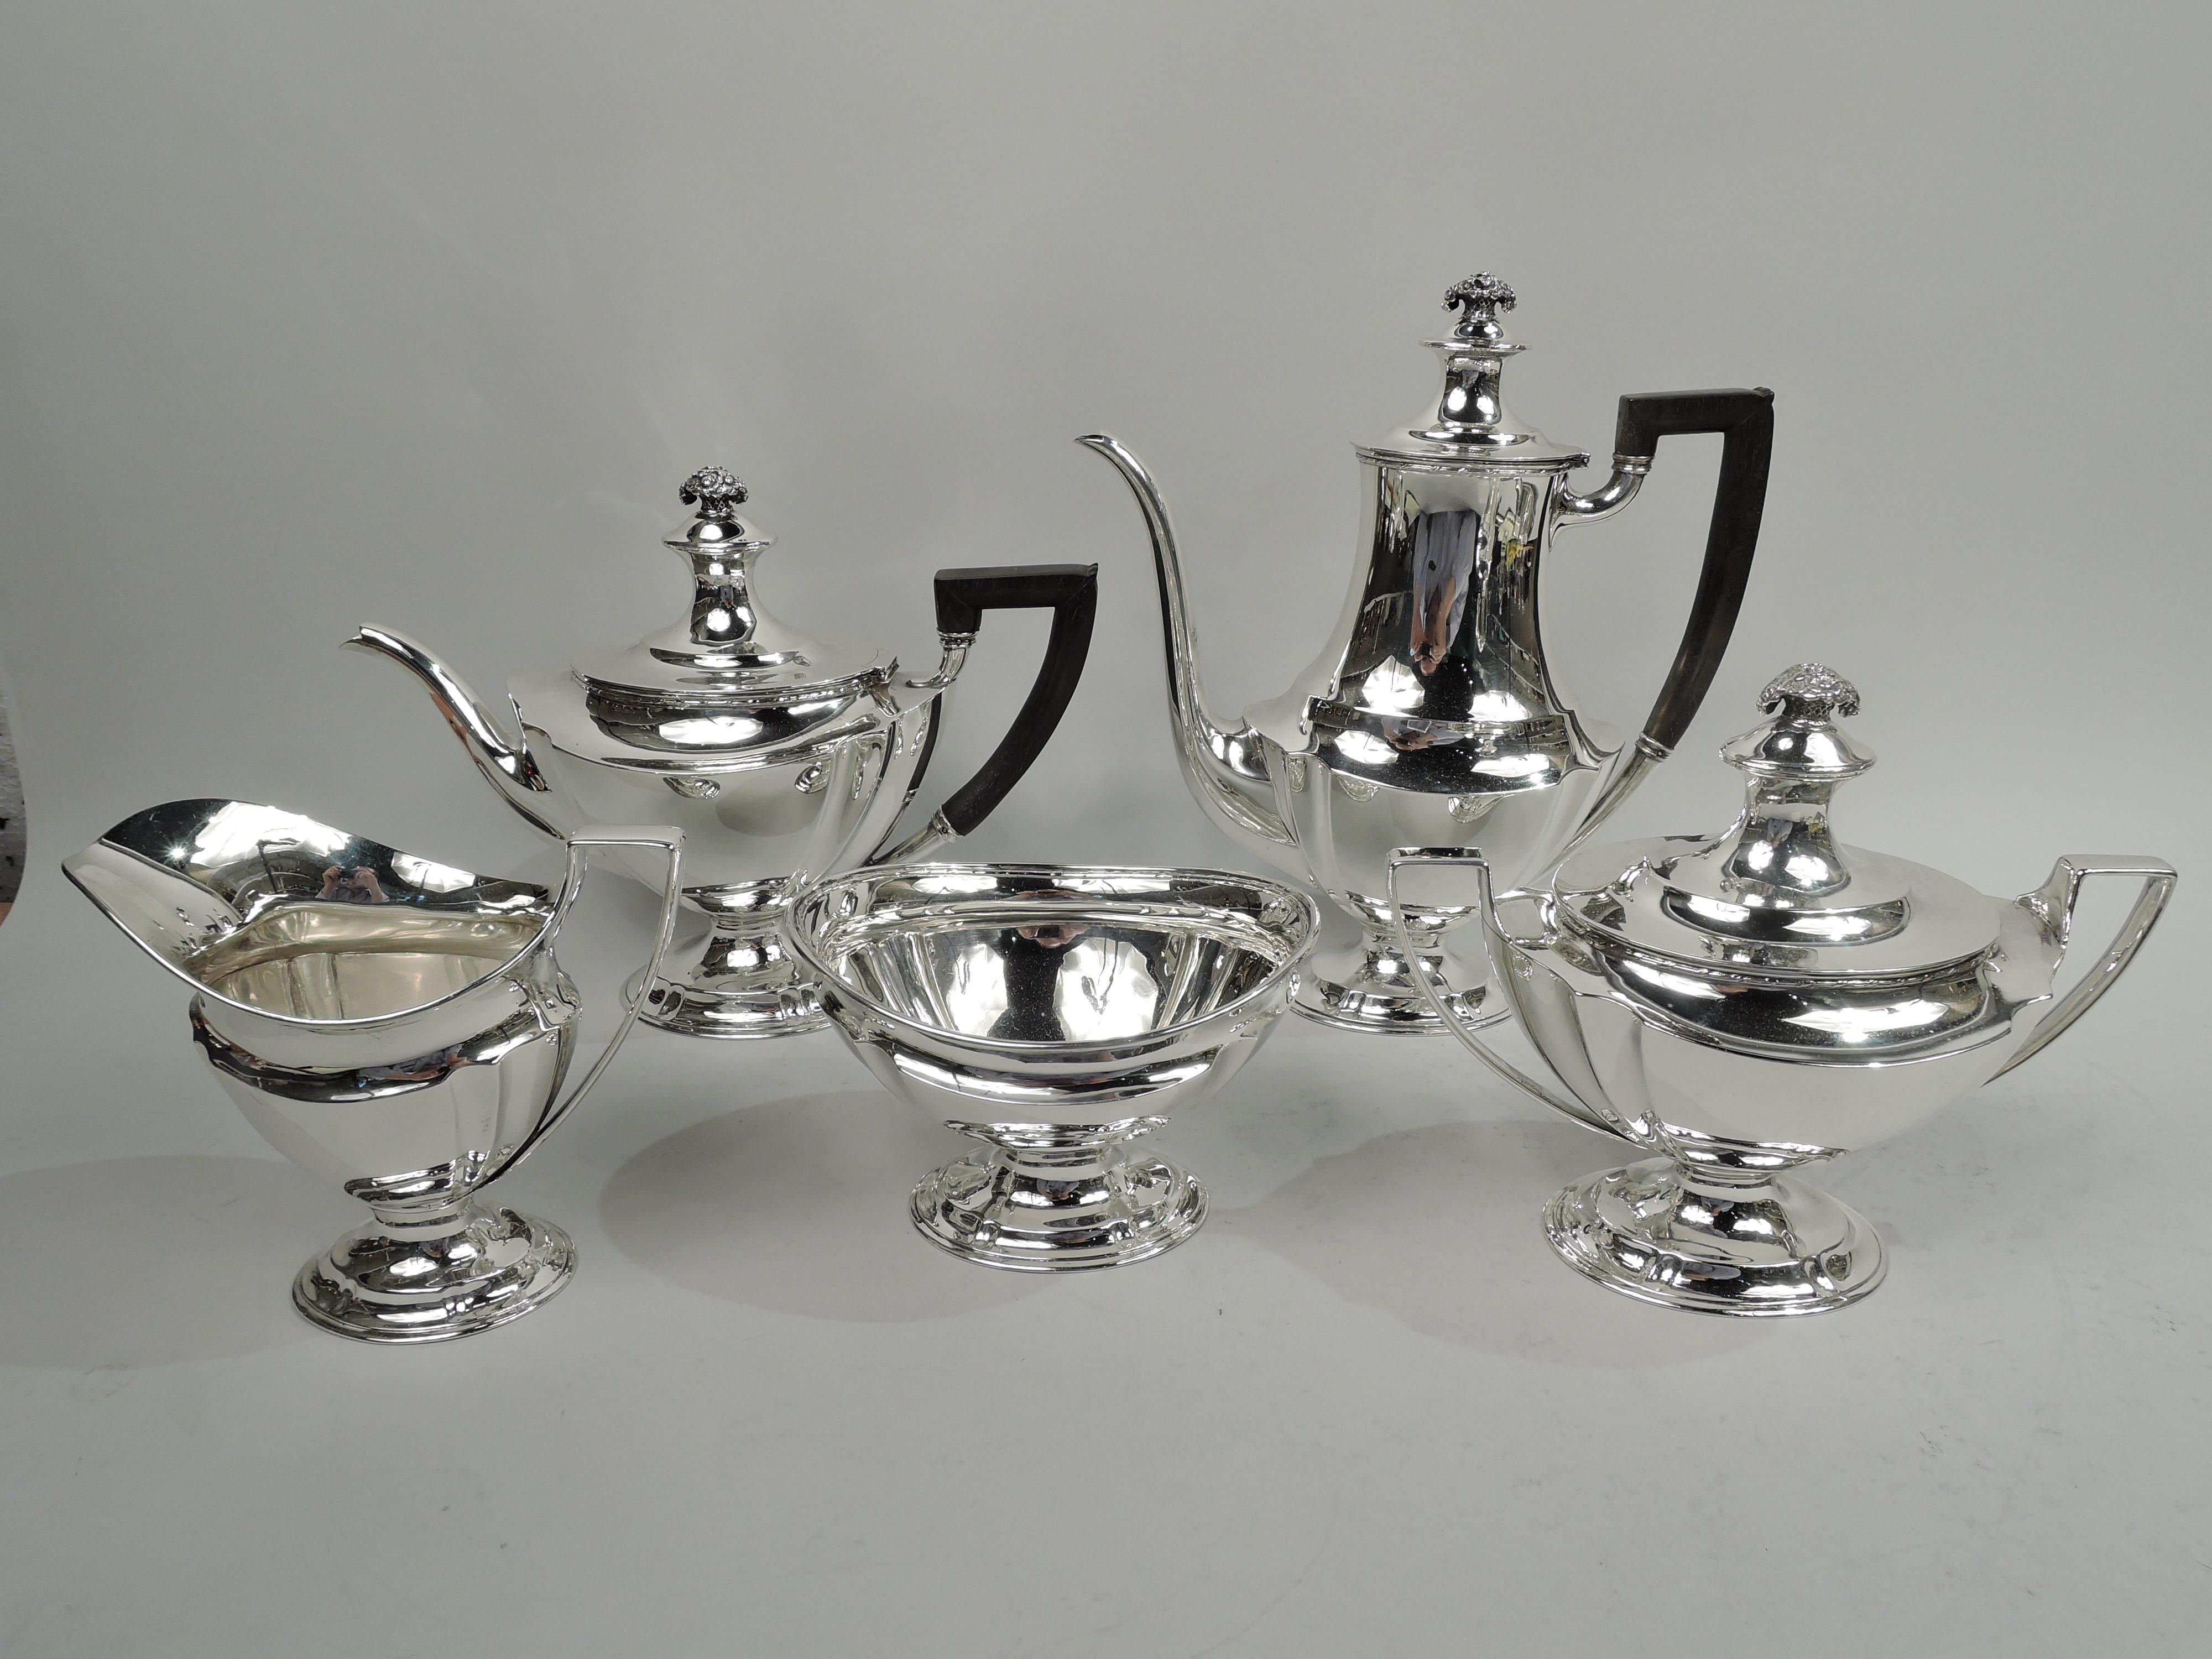 Edwardian Regency sterling silver coffee set. Made by Tiffany & Co. in New York, ca 1910. This set comprises coffeepot, teapot, creamer, sugar, and waste bowl. Tapering and fluted ovoid bodies. Feet domed. Covers double domed with cast flower basket